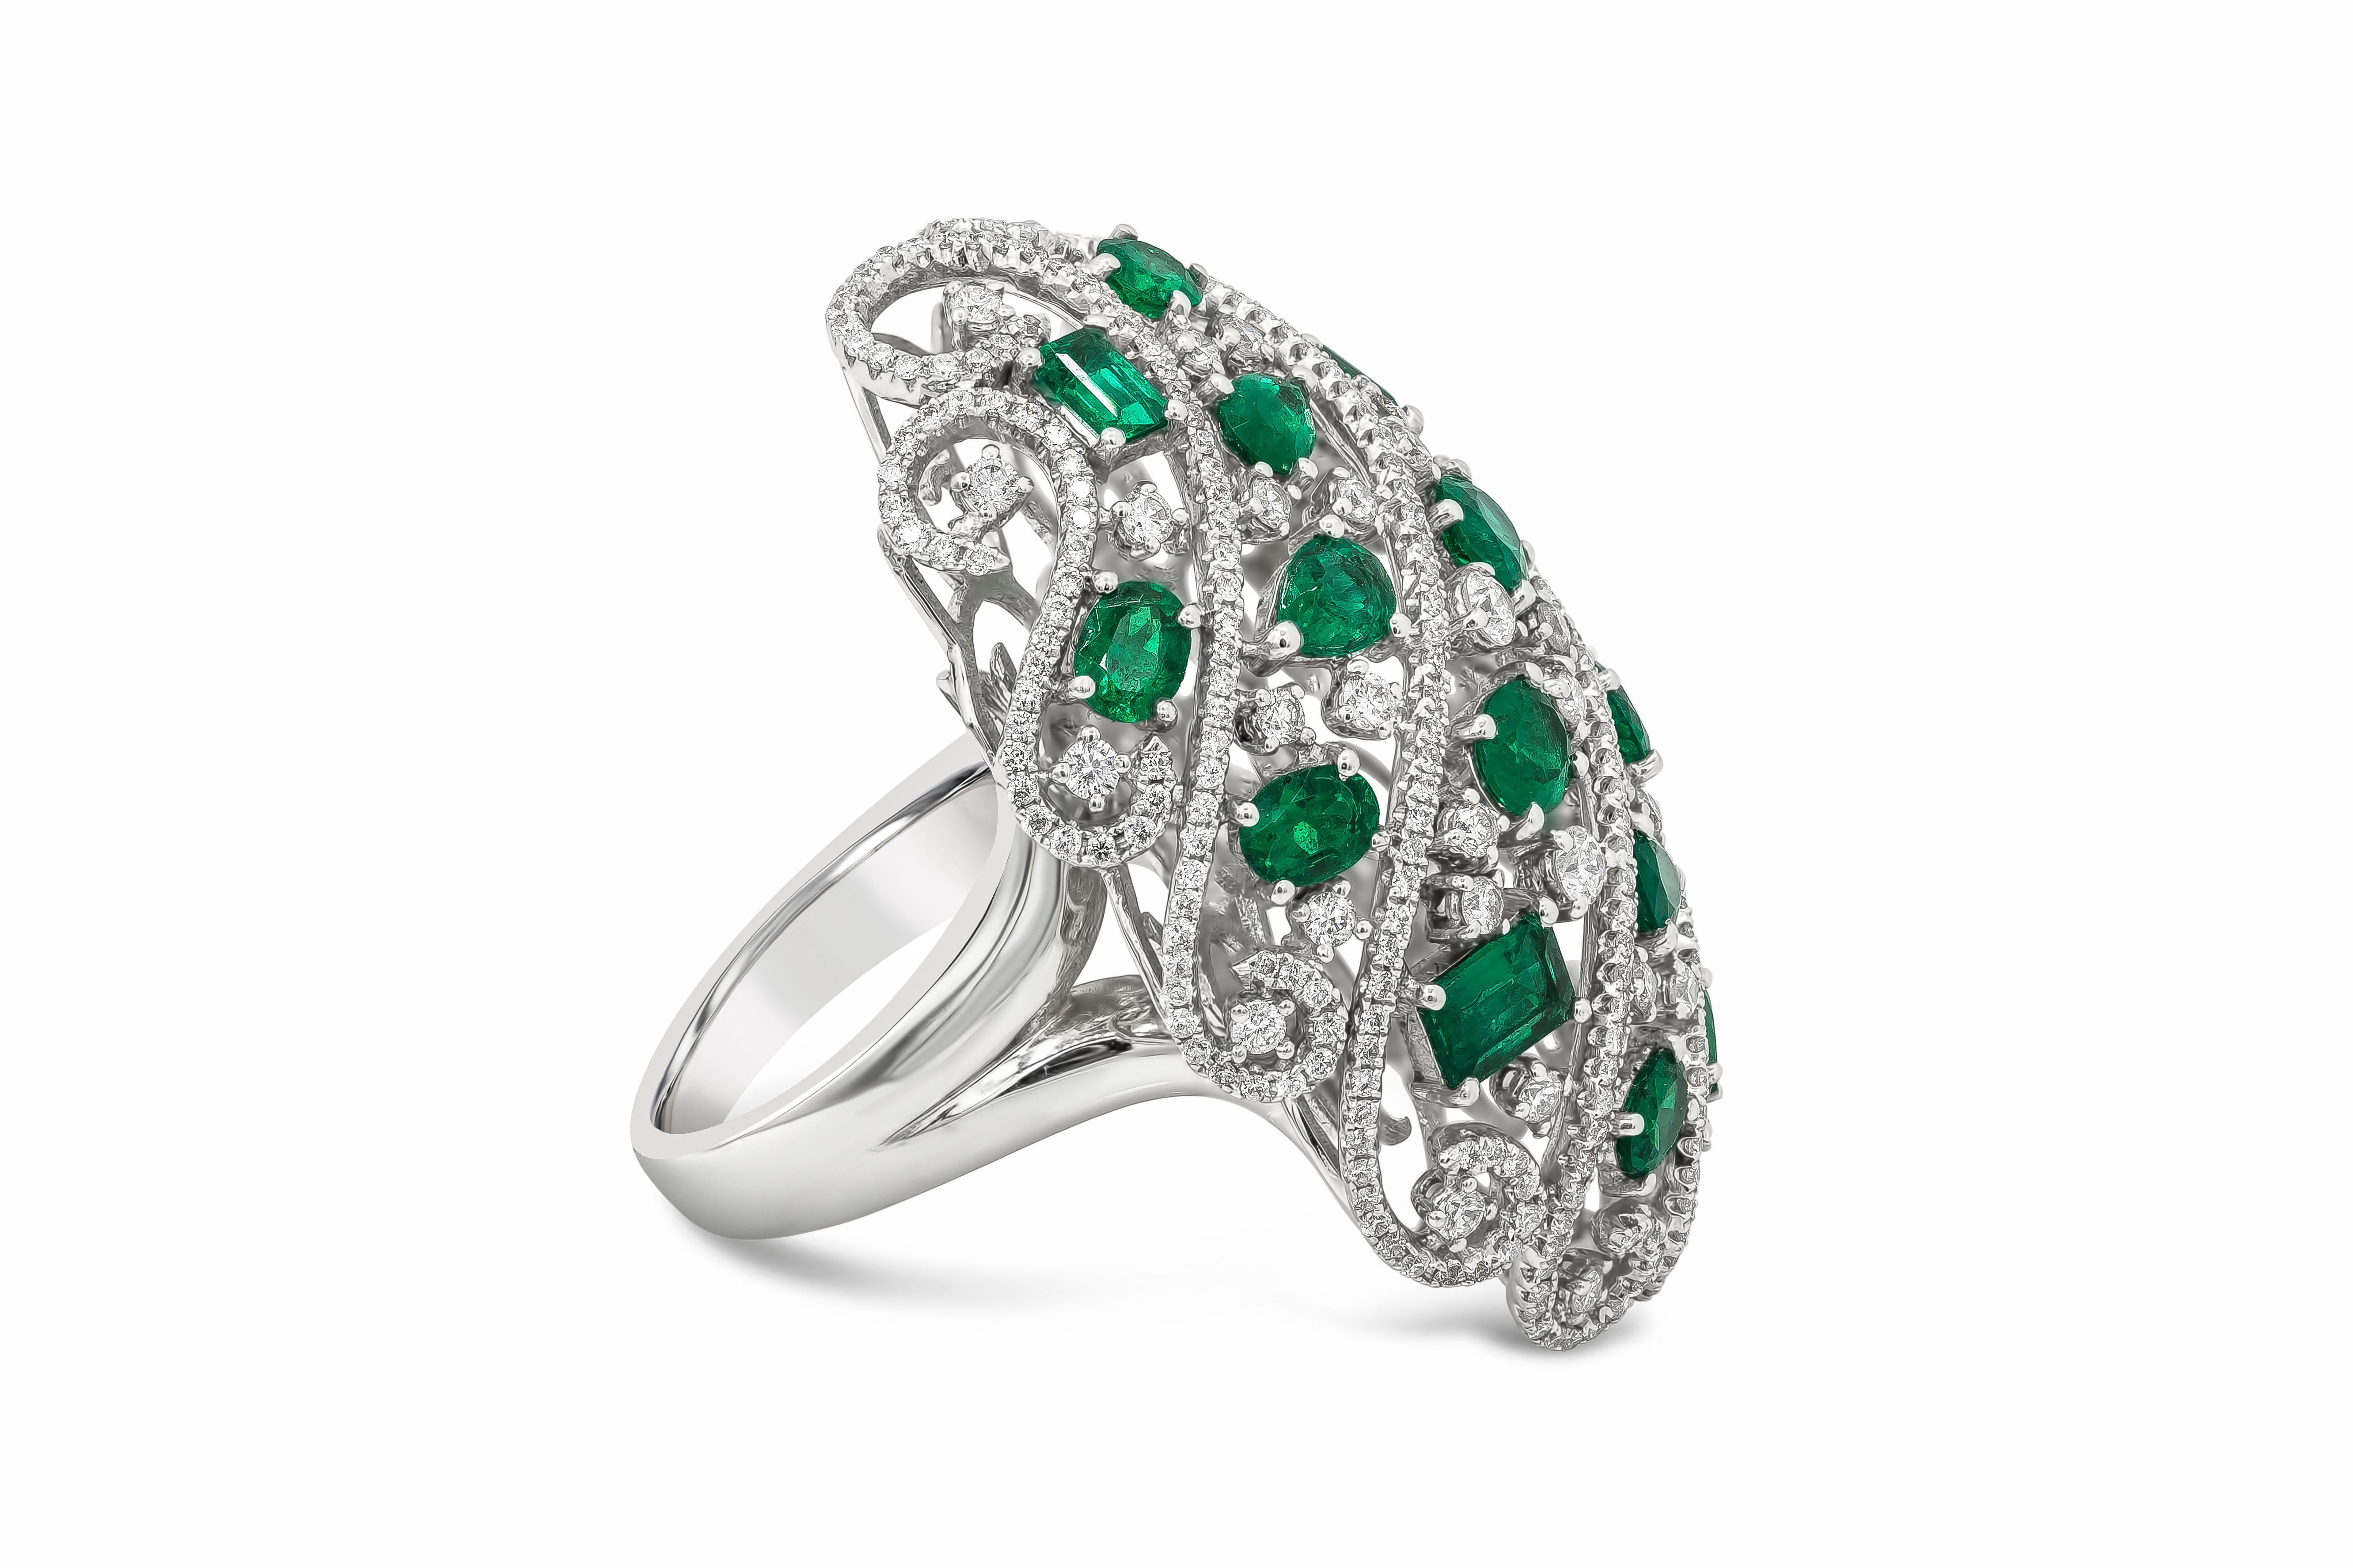 This well crafted fashion dome ring showcases 16 oval cut color-rich green emeralds weighing 3.98 carats total and 330 round brilliant diamonds weighing 2.18 carats total, set in a fashionable open-work dome style design. Finely made in 18k white